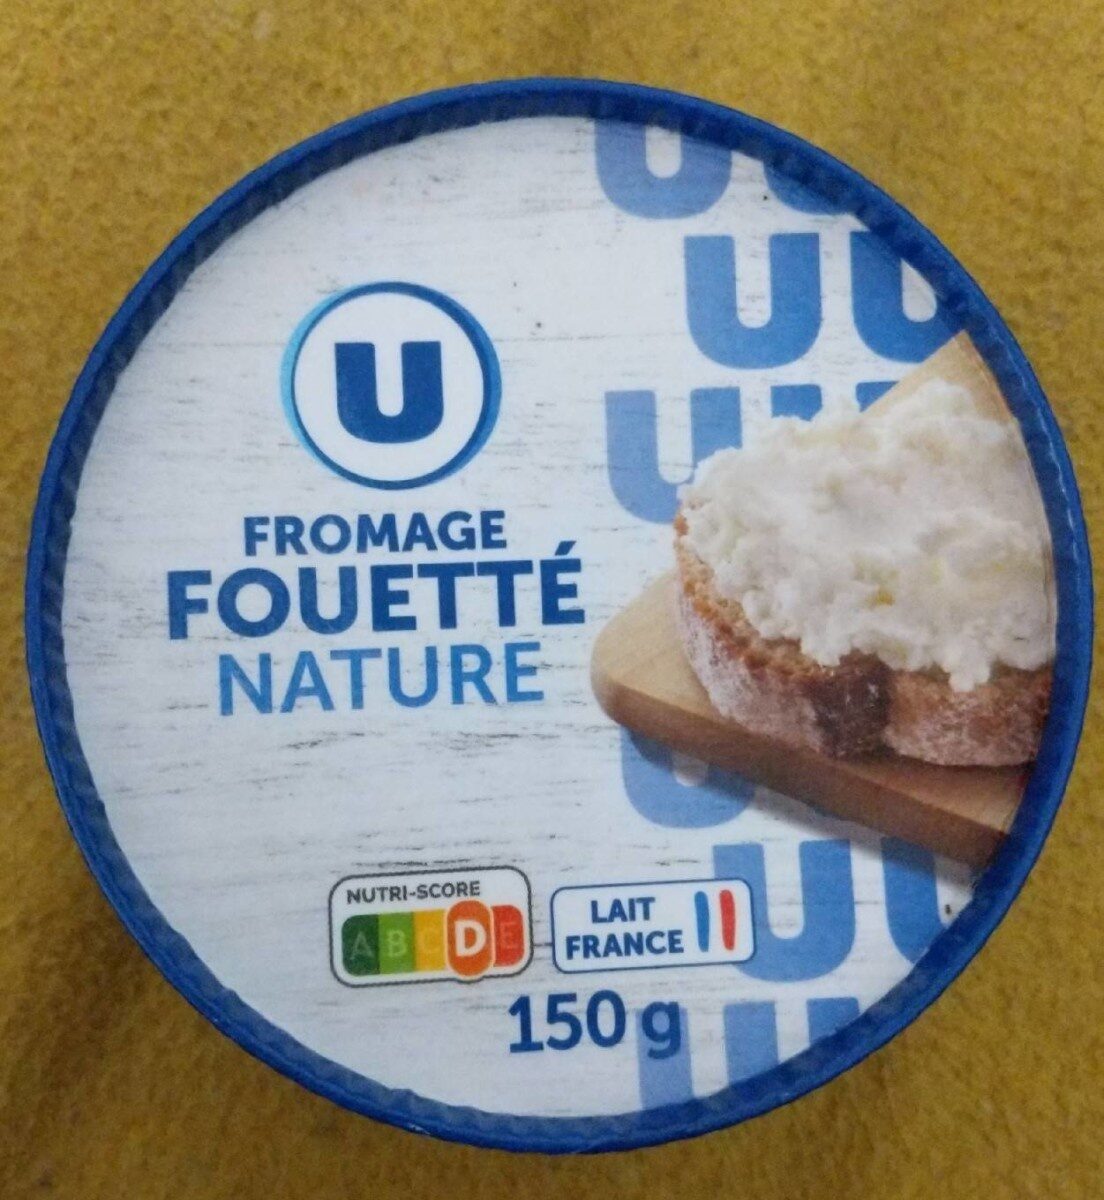 Fromage fouetté nature - Product - fr